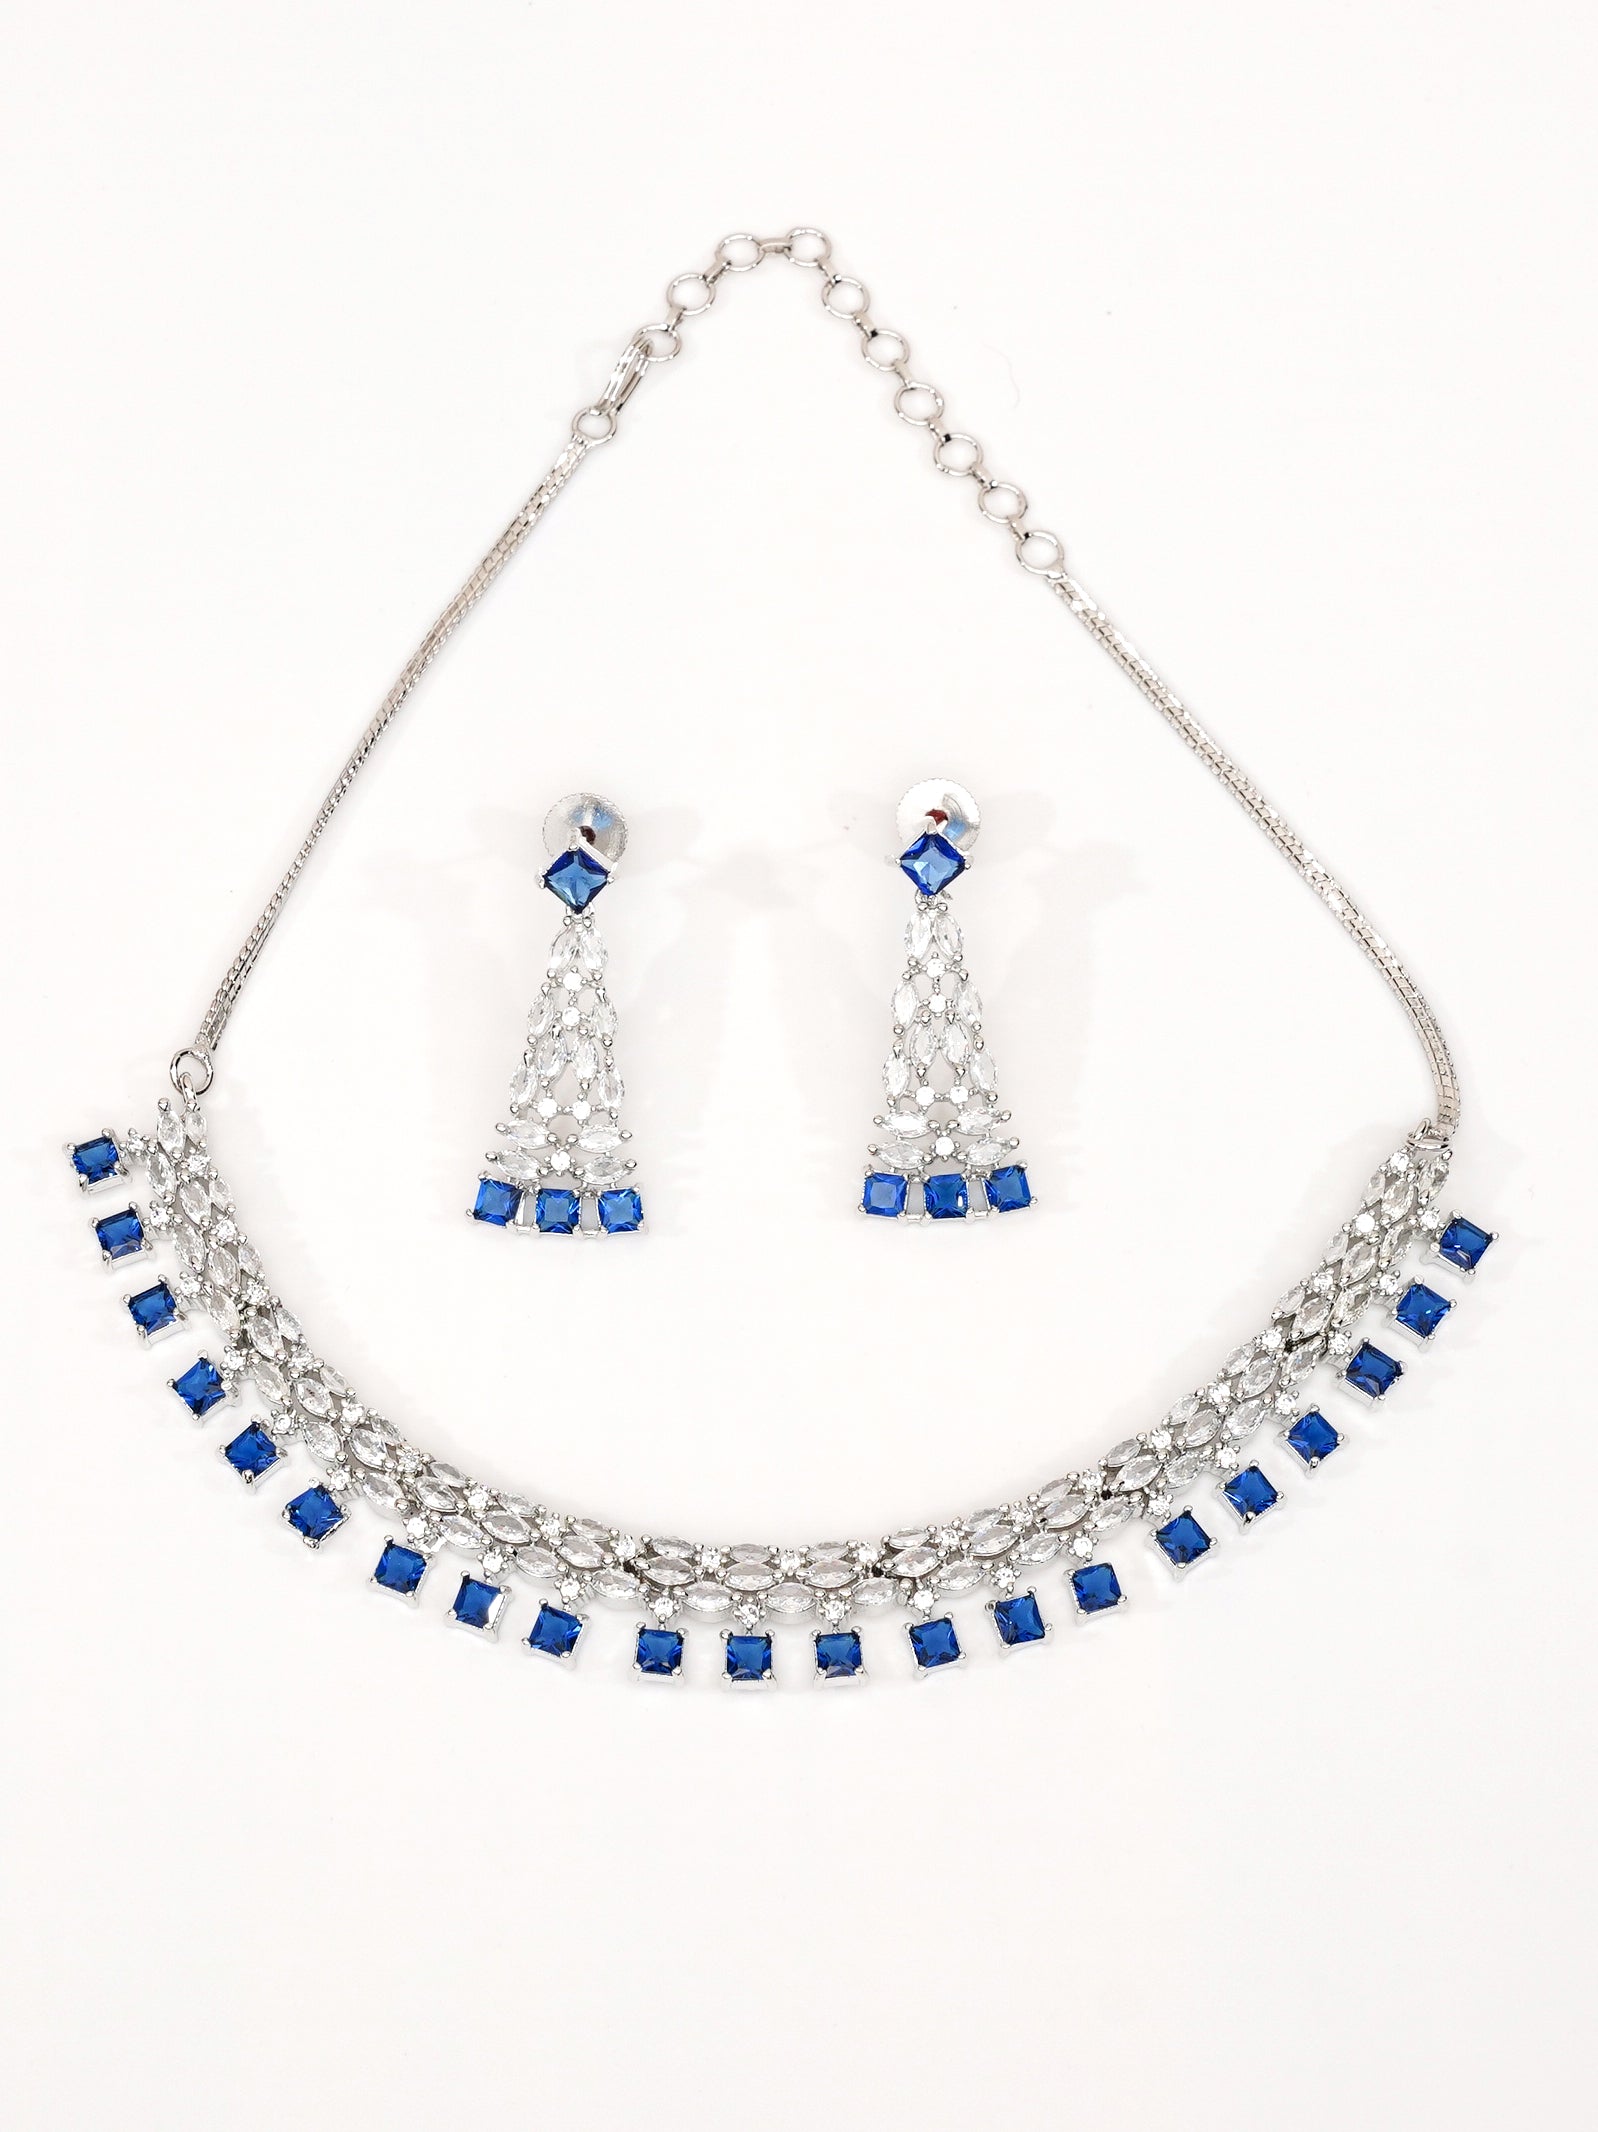 Premium Sayara Collection White Gold Plated Necklace set with best quality blue CZ Stone 8812N